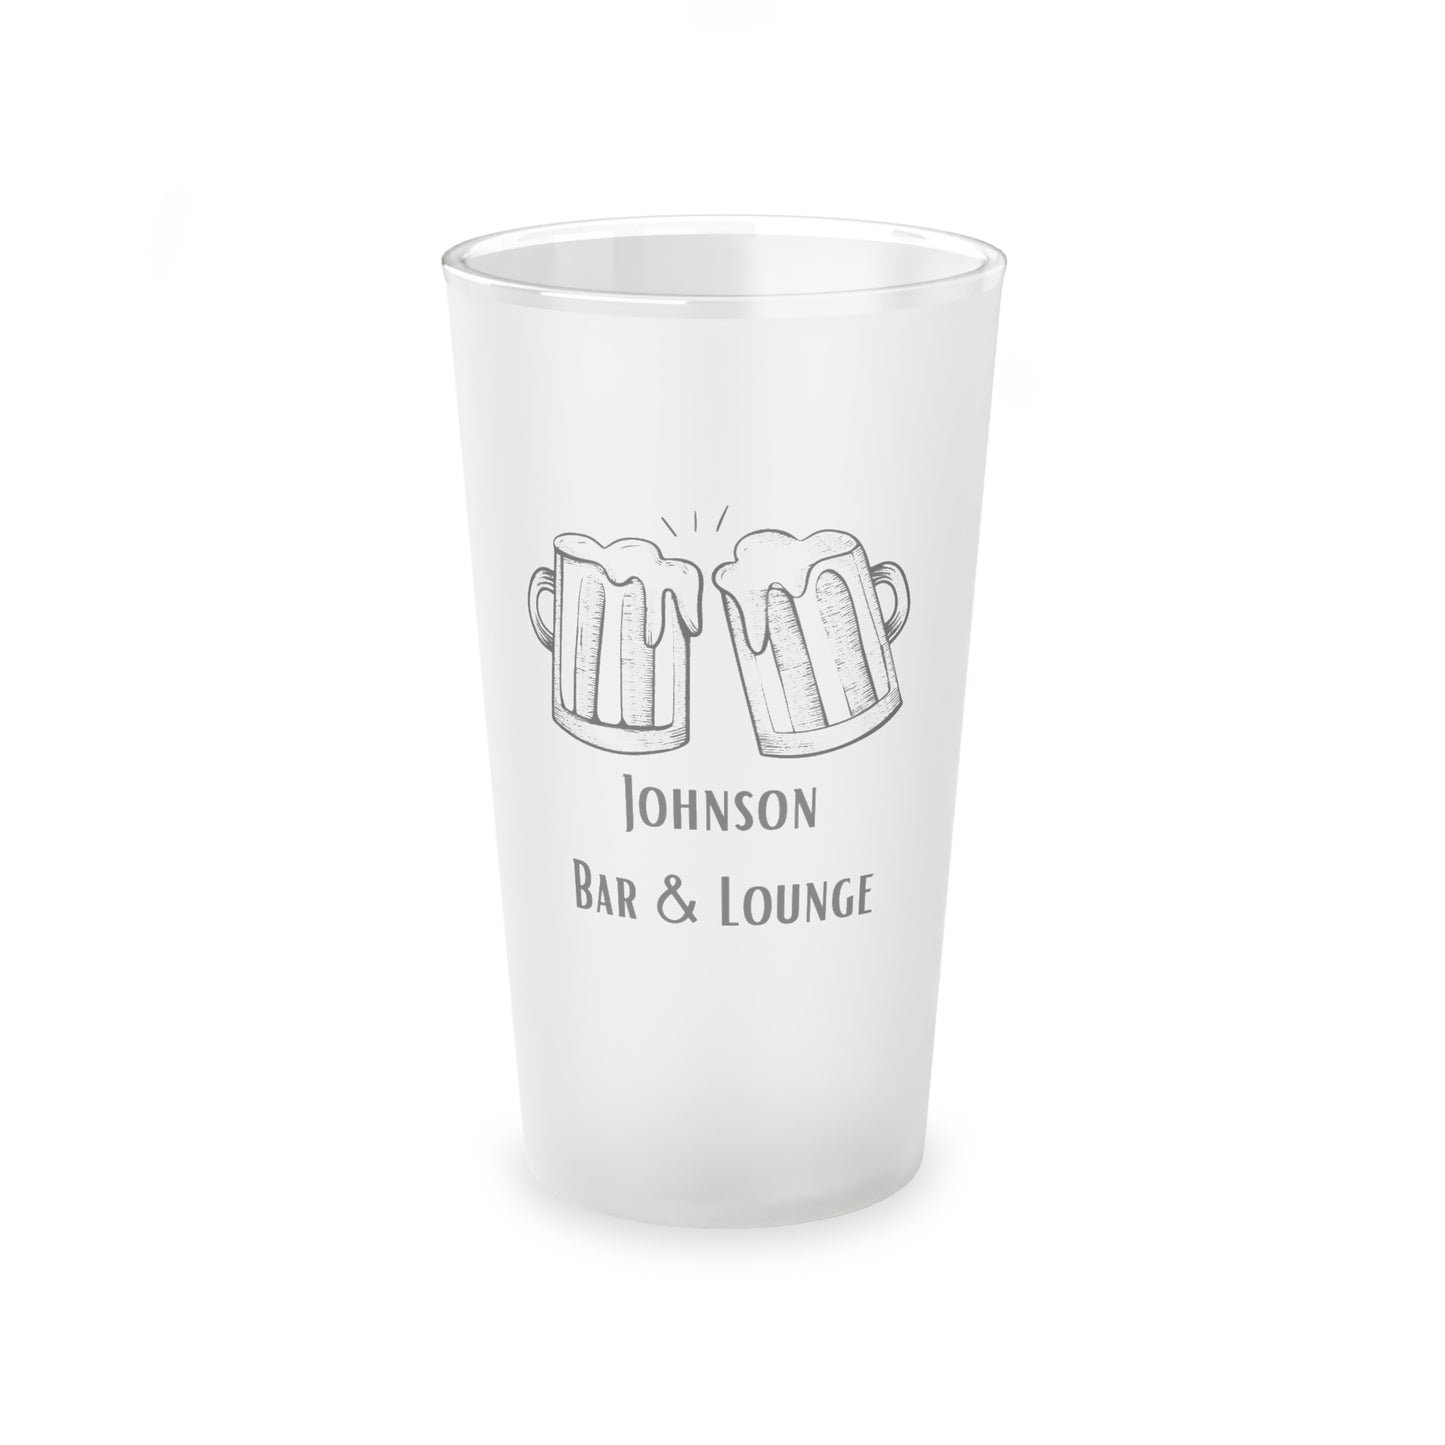 Personalized Frosted Pint Glass, 16oz Personalized Beer Glasses for Your Home Bar